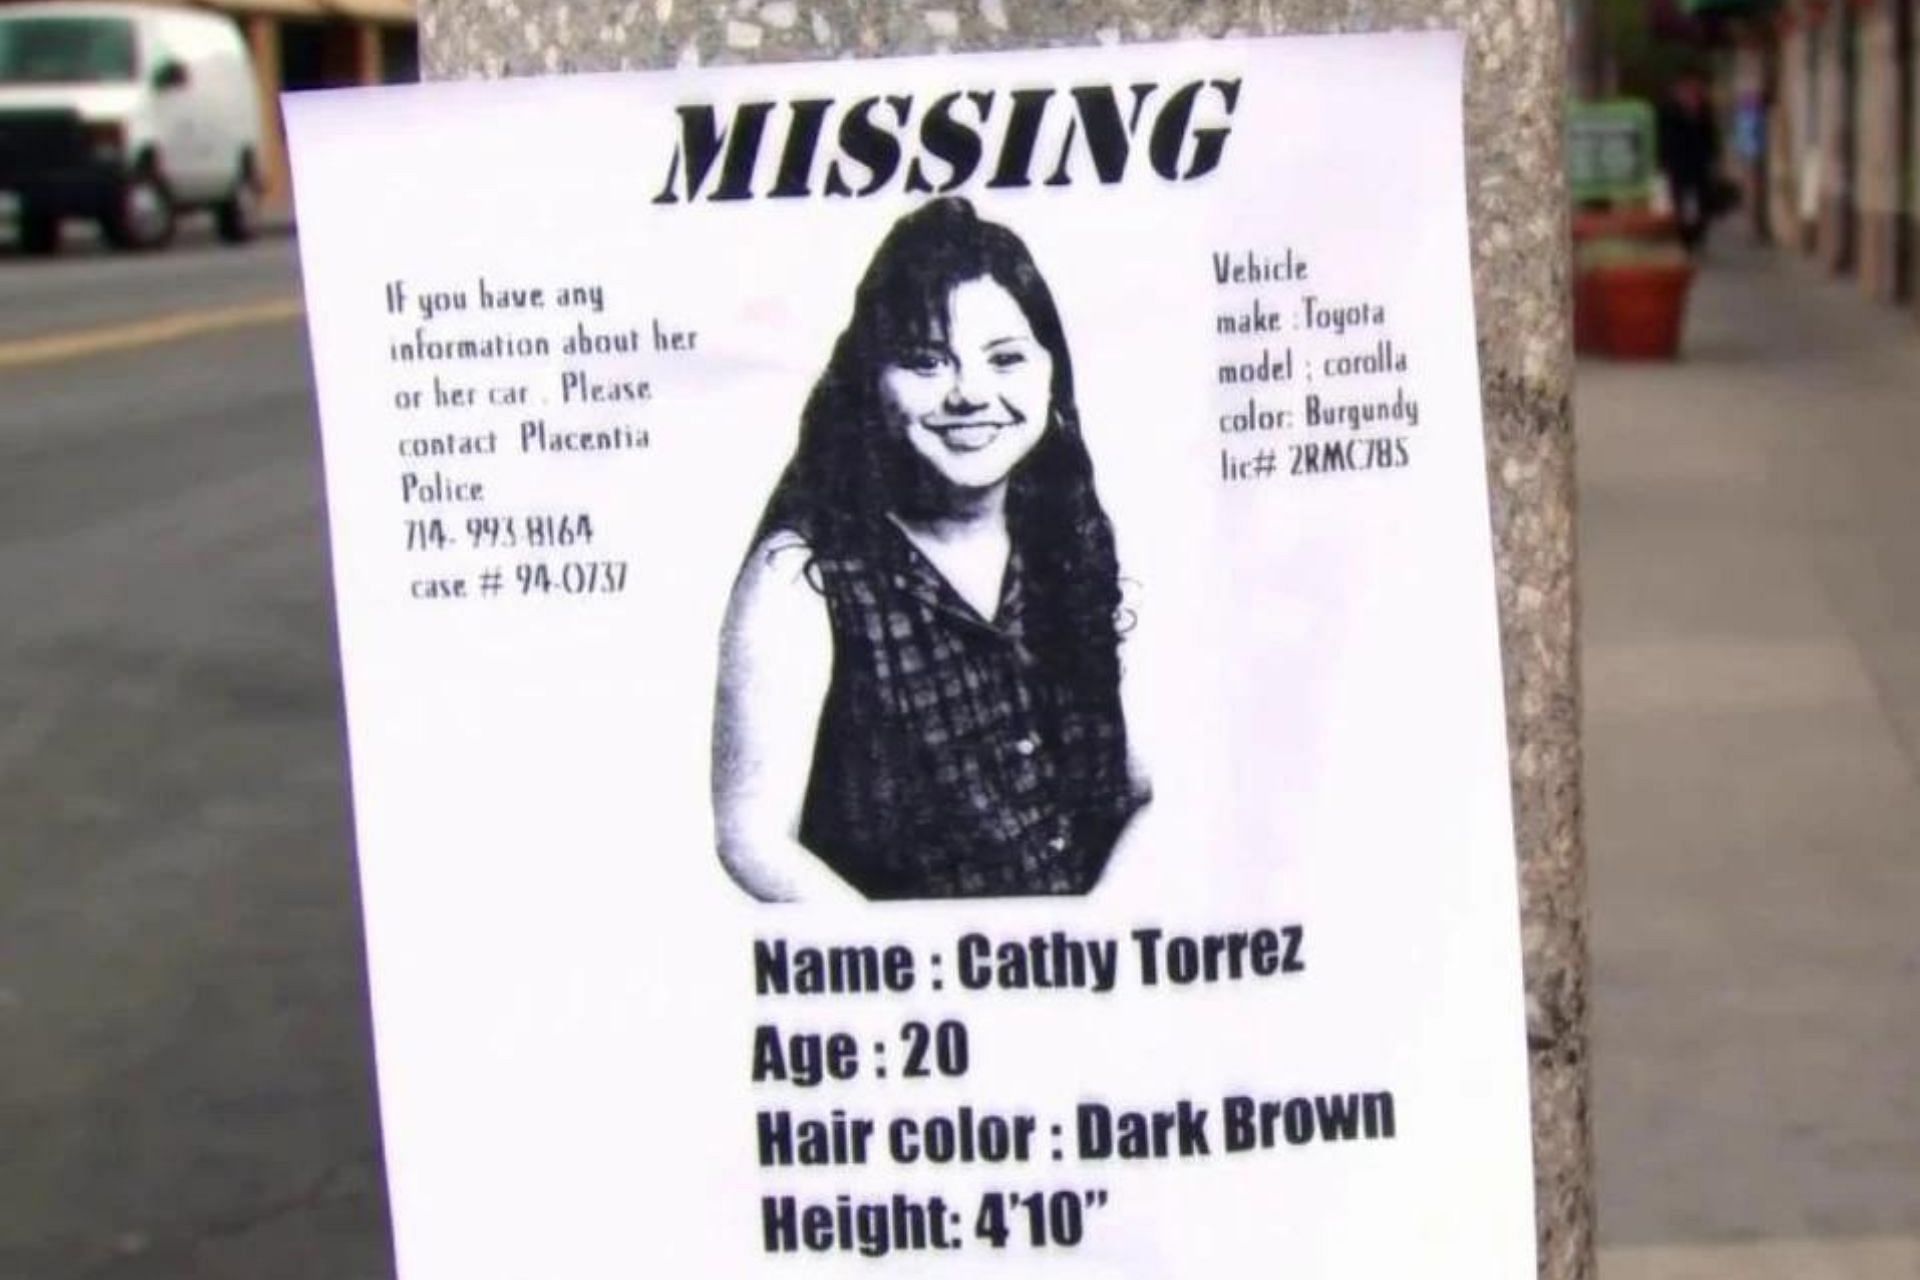 CSFU student Cathy Torrez was stabbed to death in February 1994 (Image via NBC Dateline)